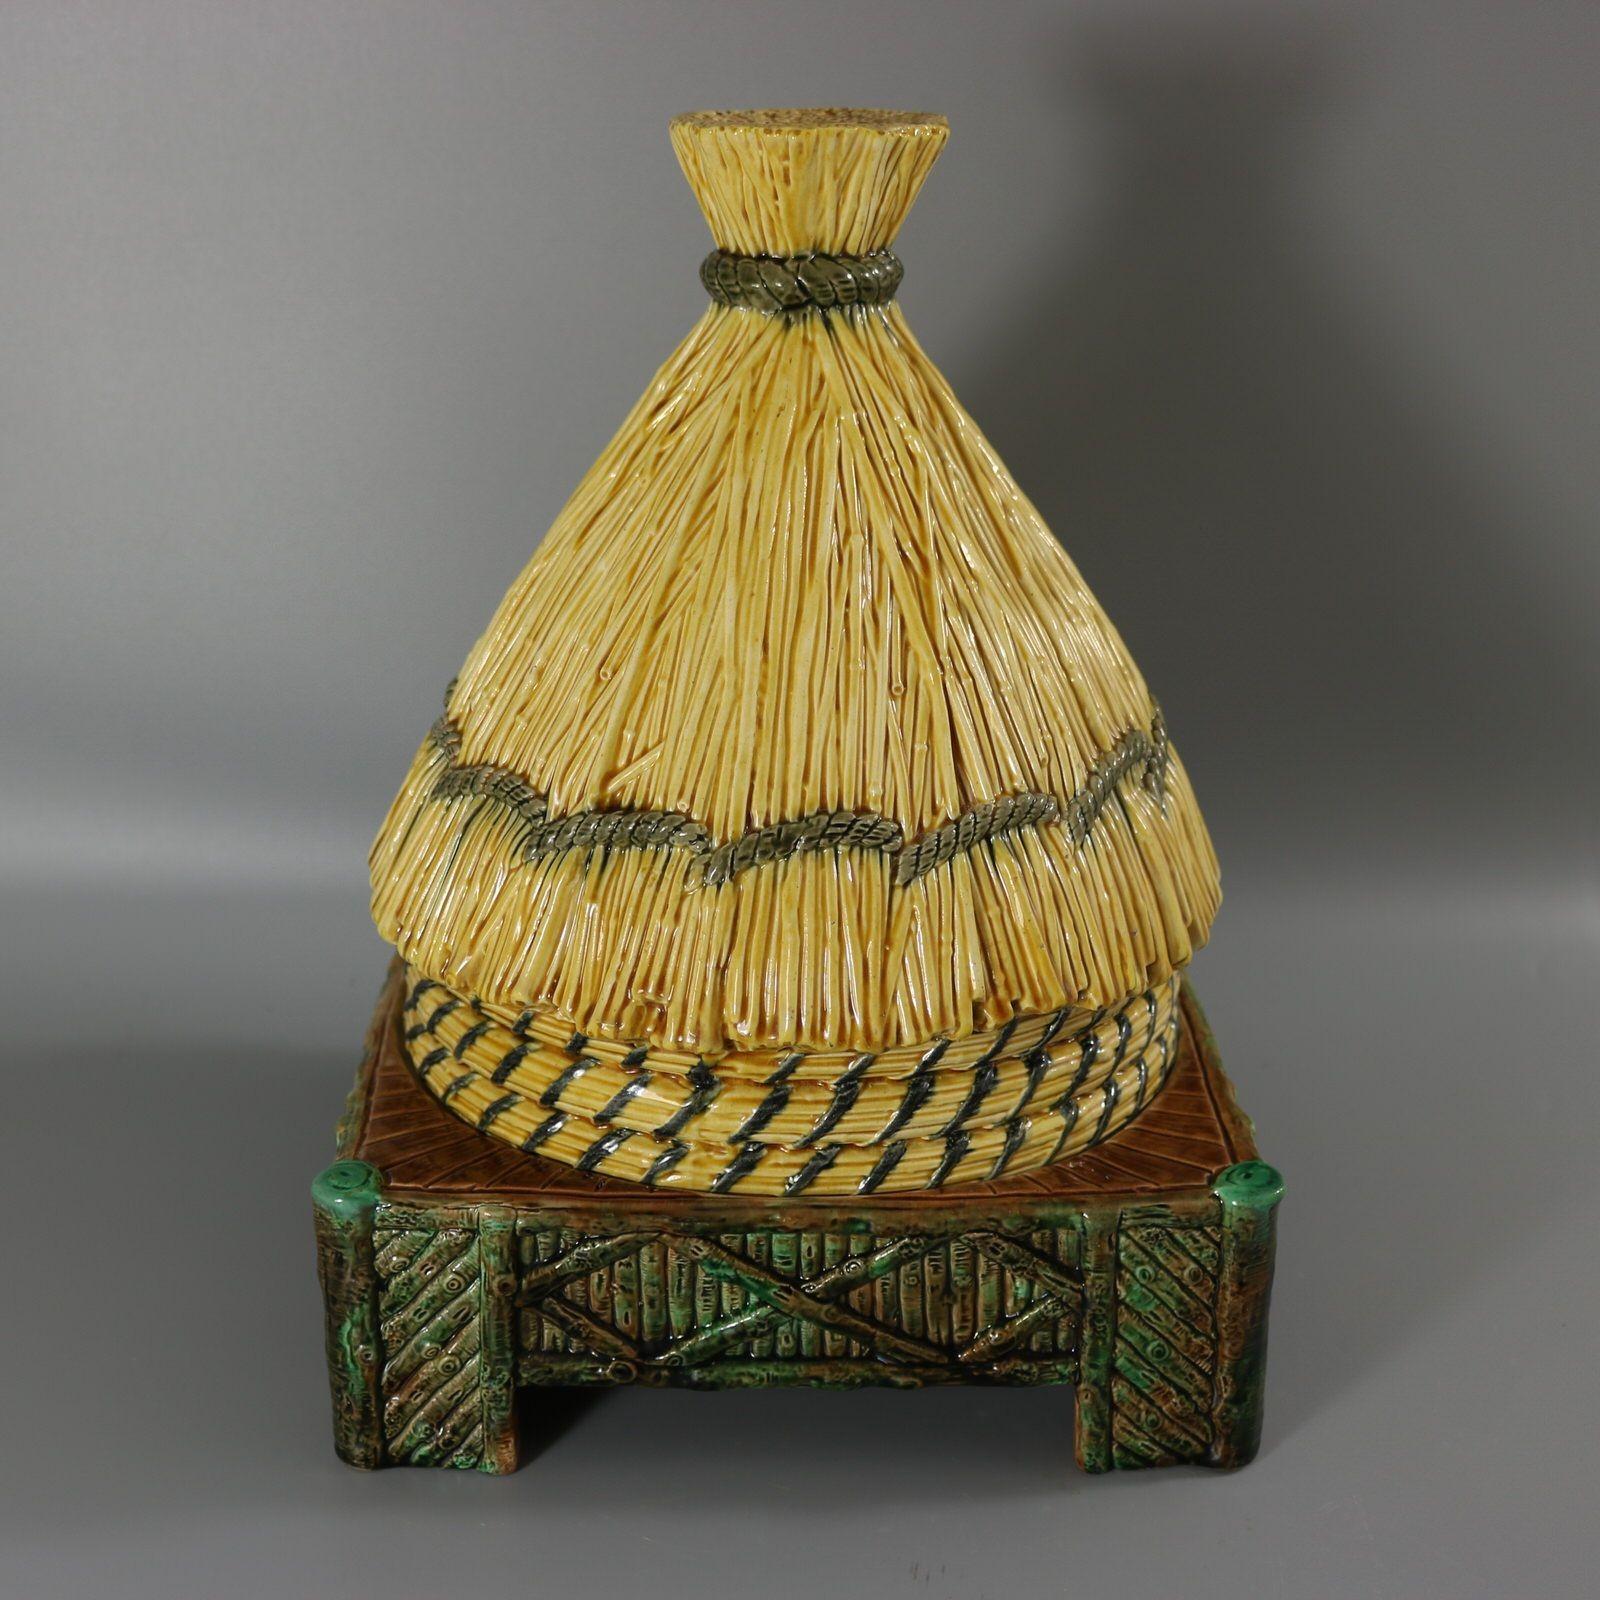 Late 19th Century George Jones Thatched Beehive Cheese Keeper For Sale